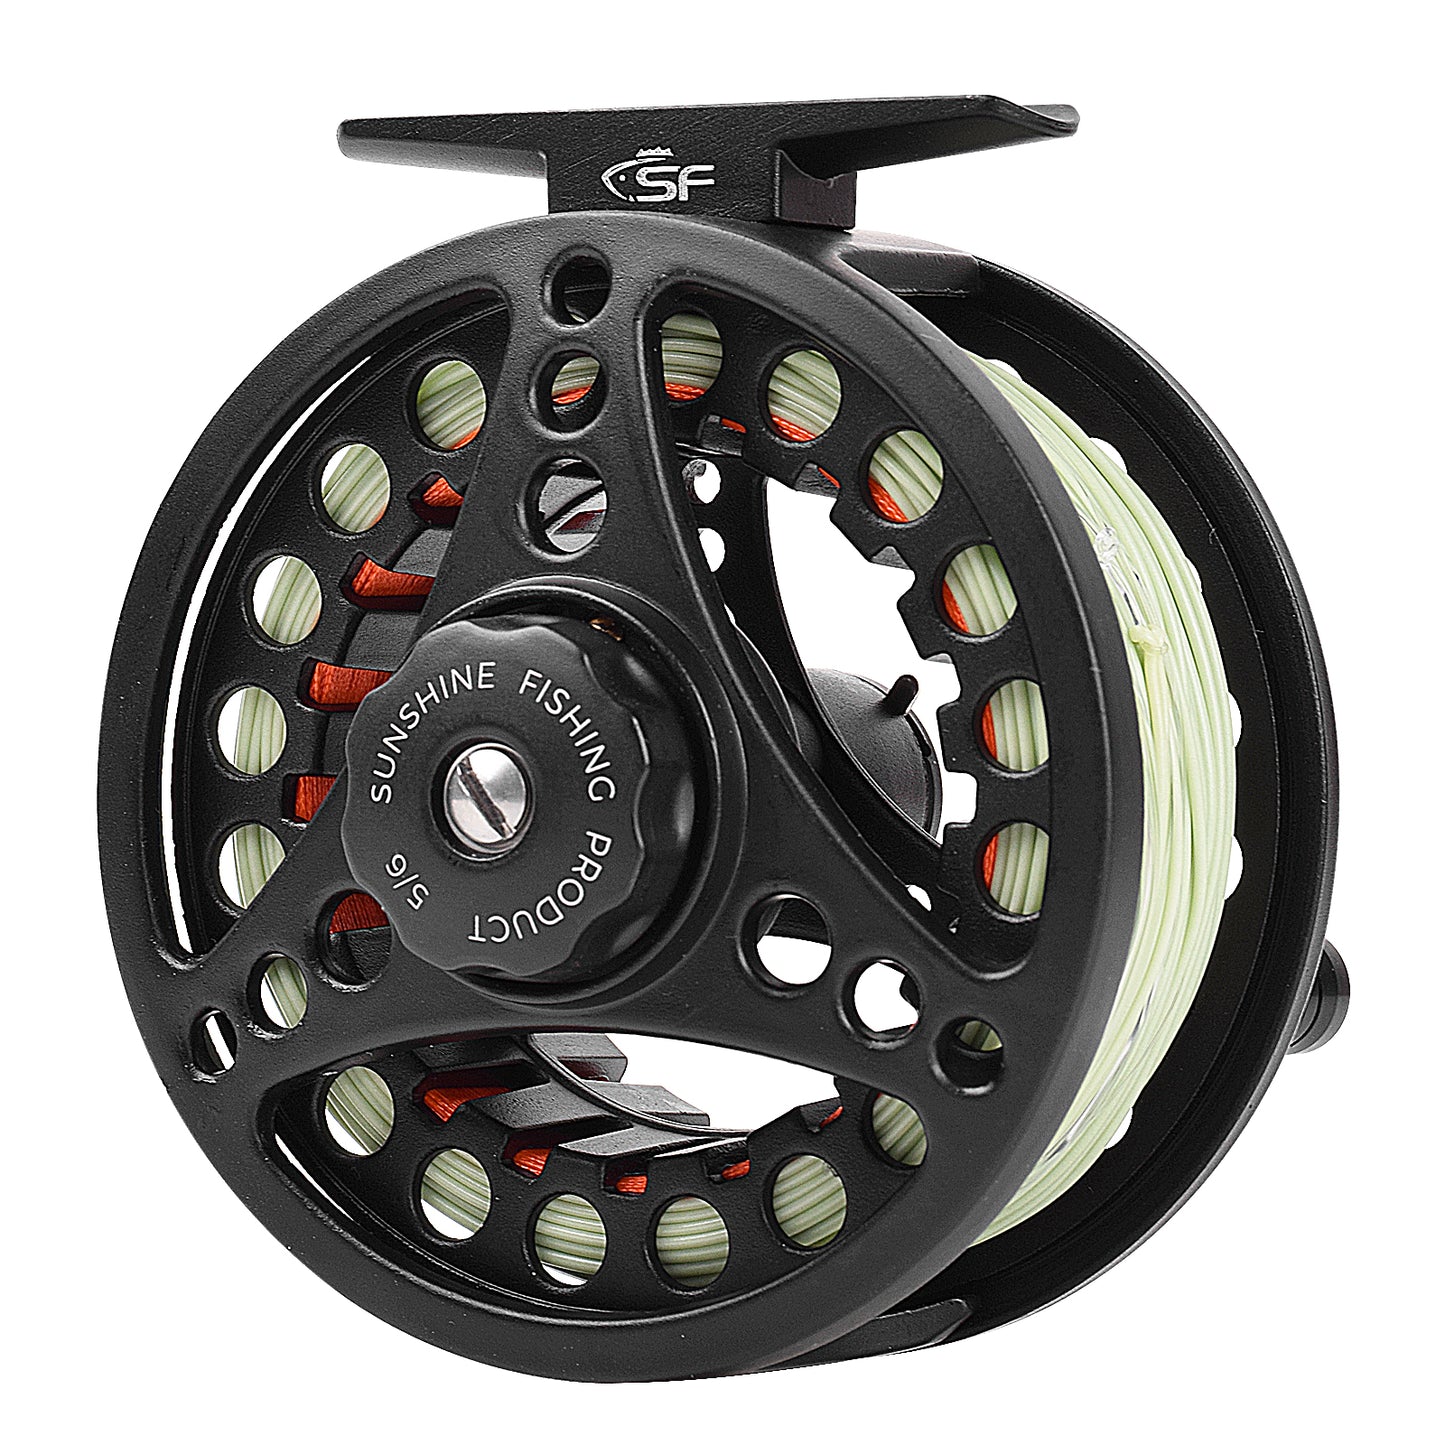 Fly Fishing Reel 5/6 WT Large Arbor Aluminum Saltwater Freshwater NEW US TOS